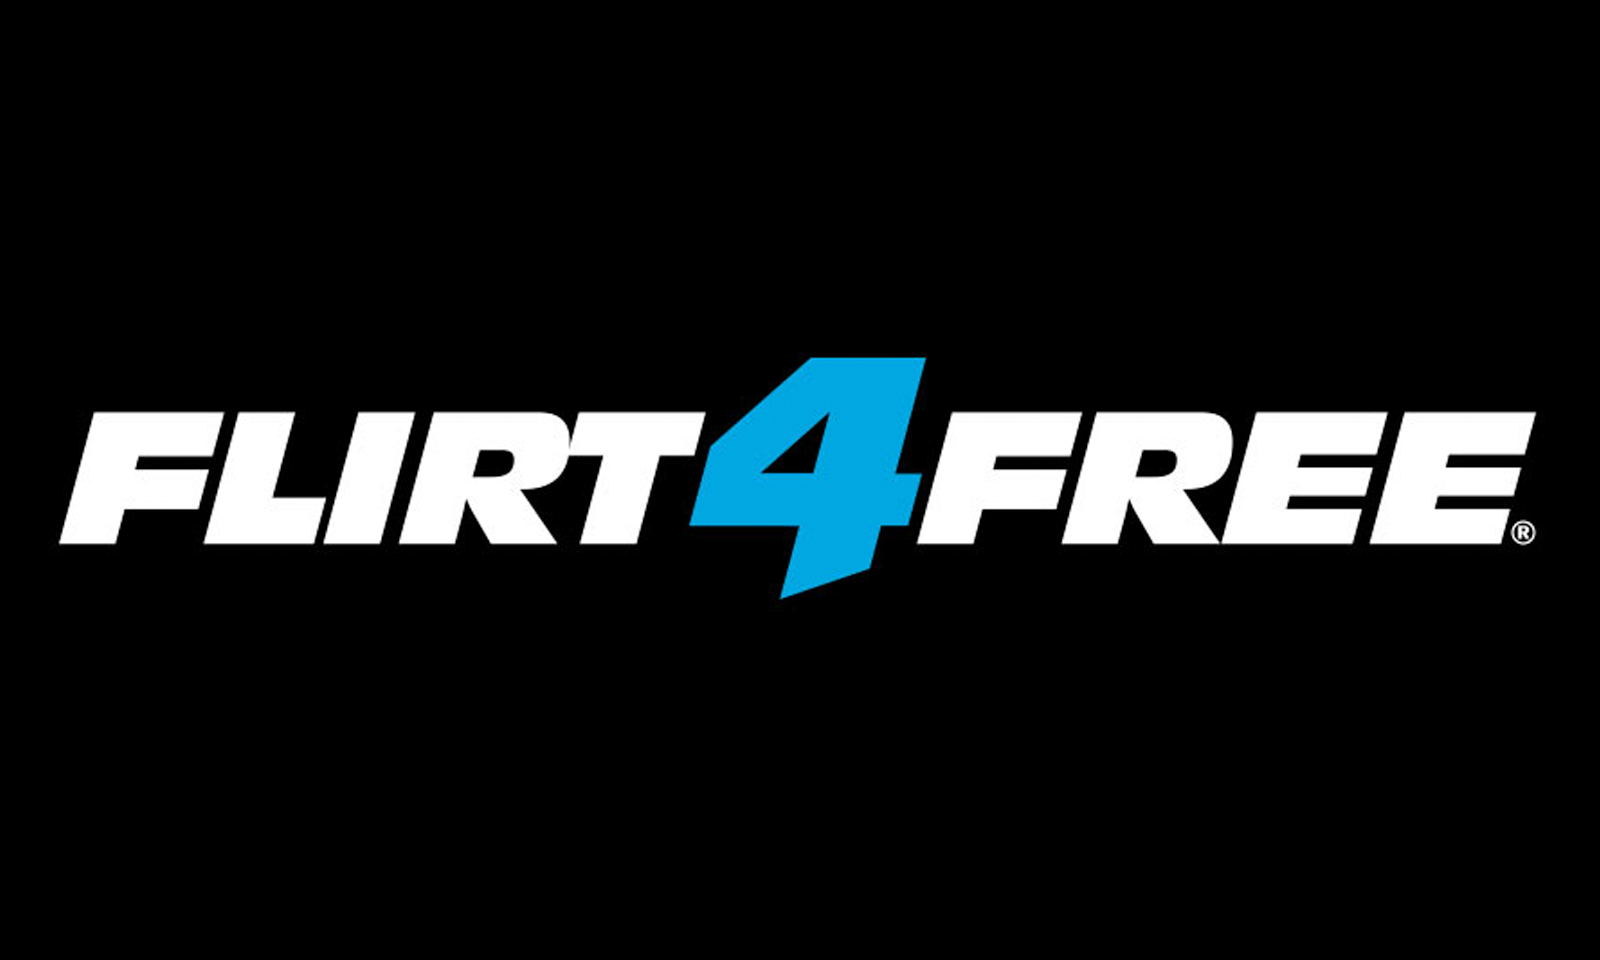 New Payment Options for Broadcasters Added by Flirt4Free